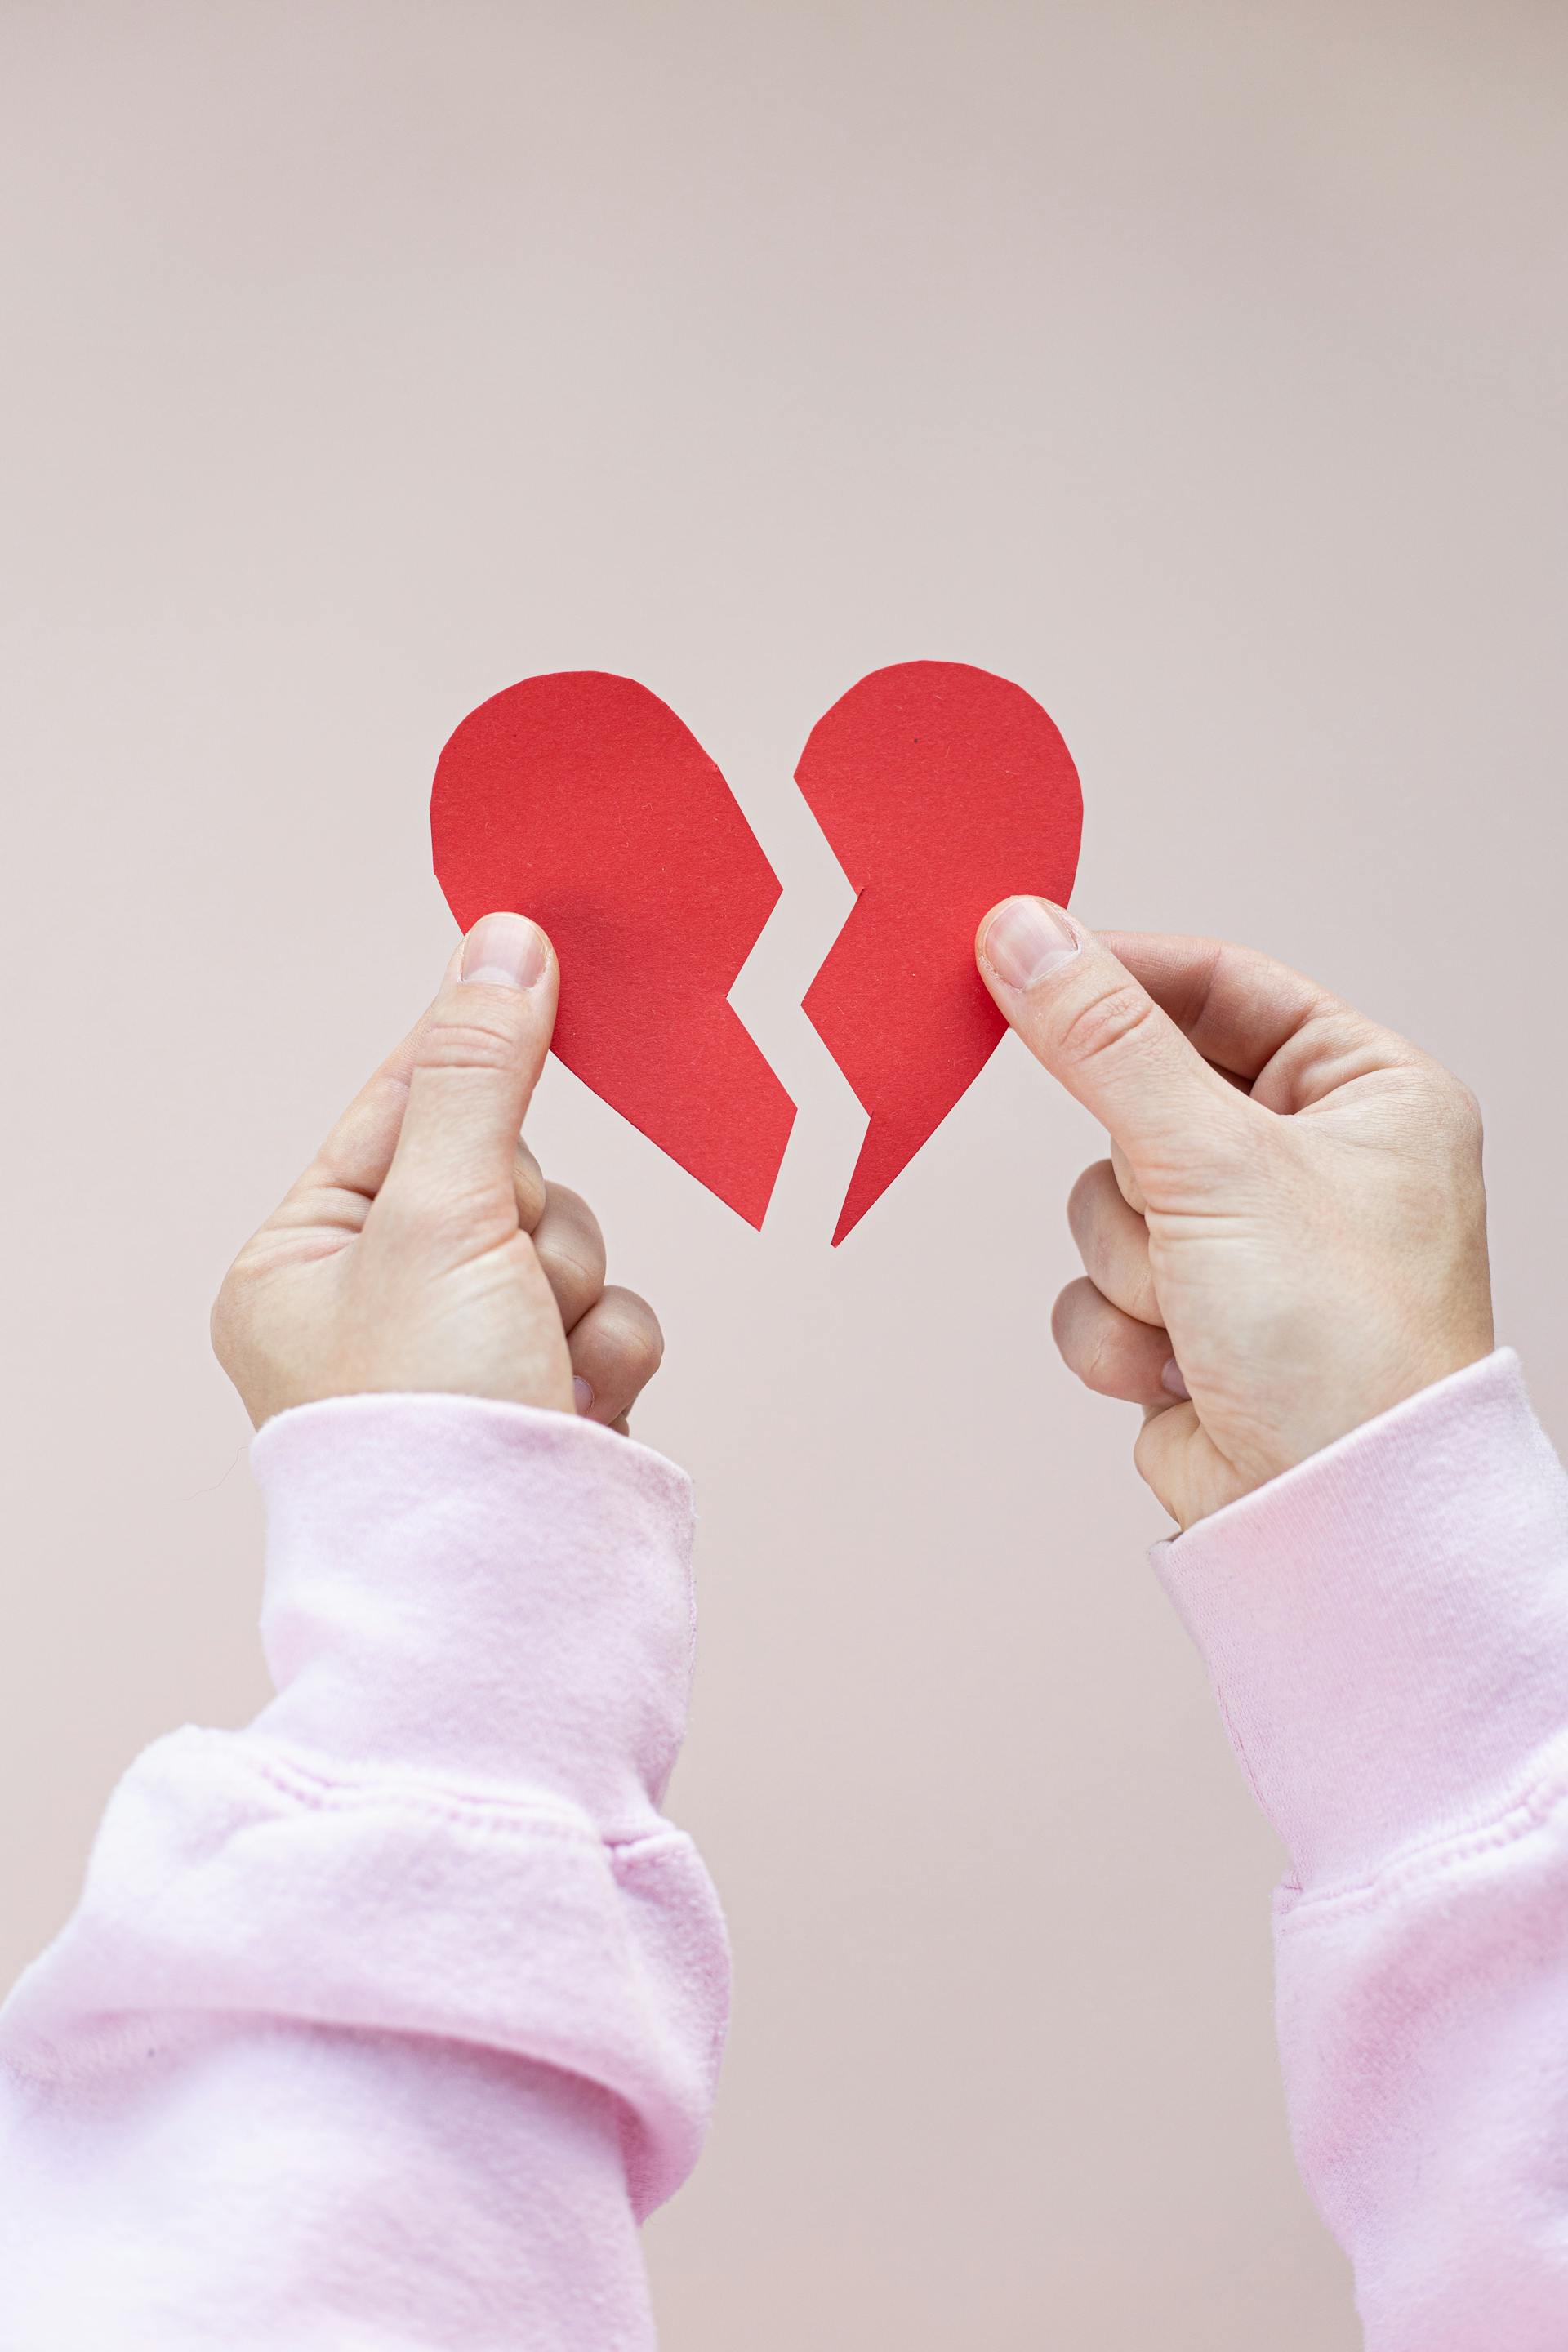 A person holding a broken red paper heart | Source: Pexels